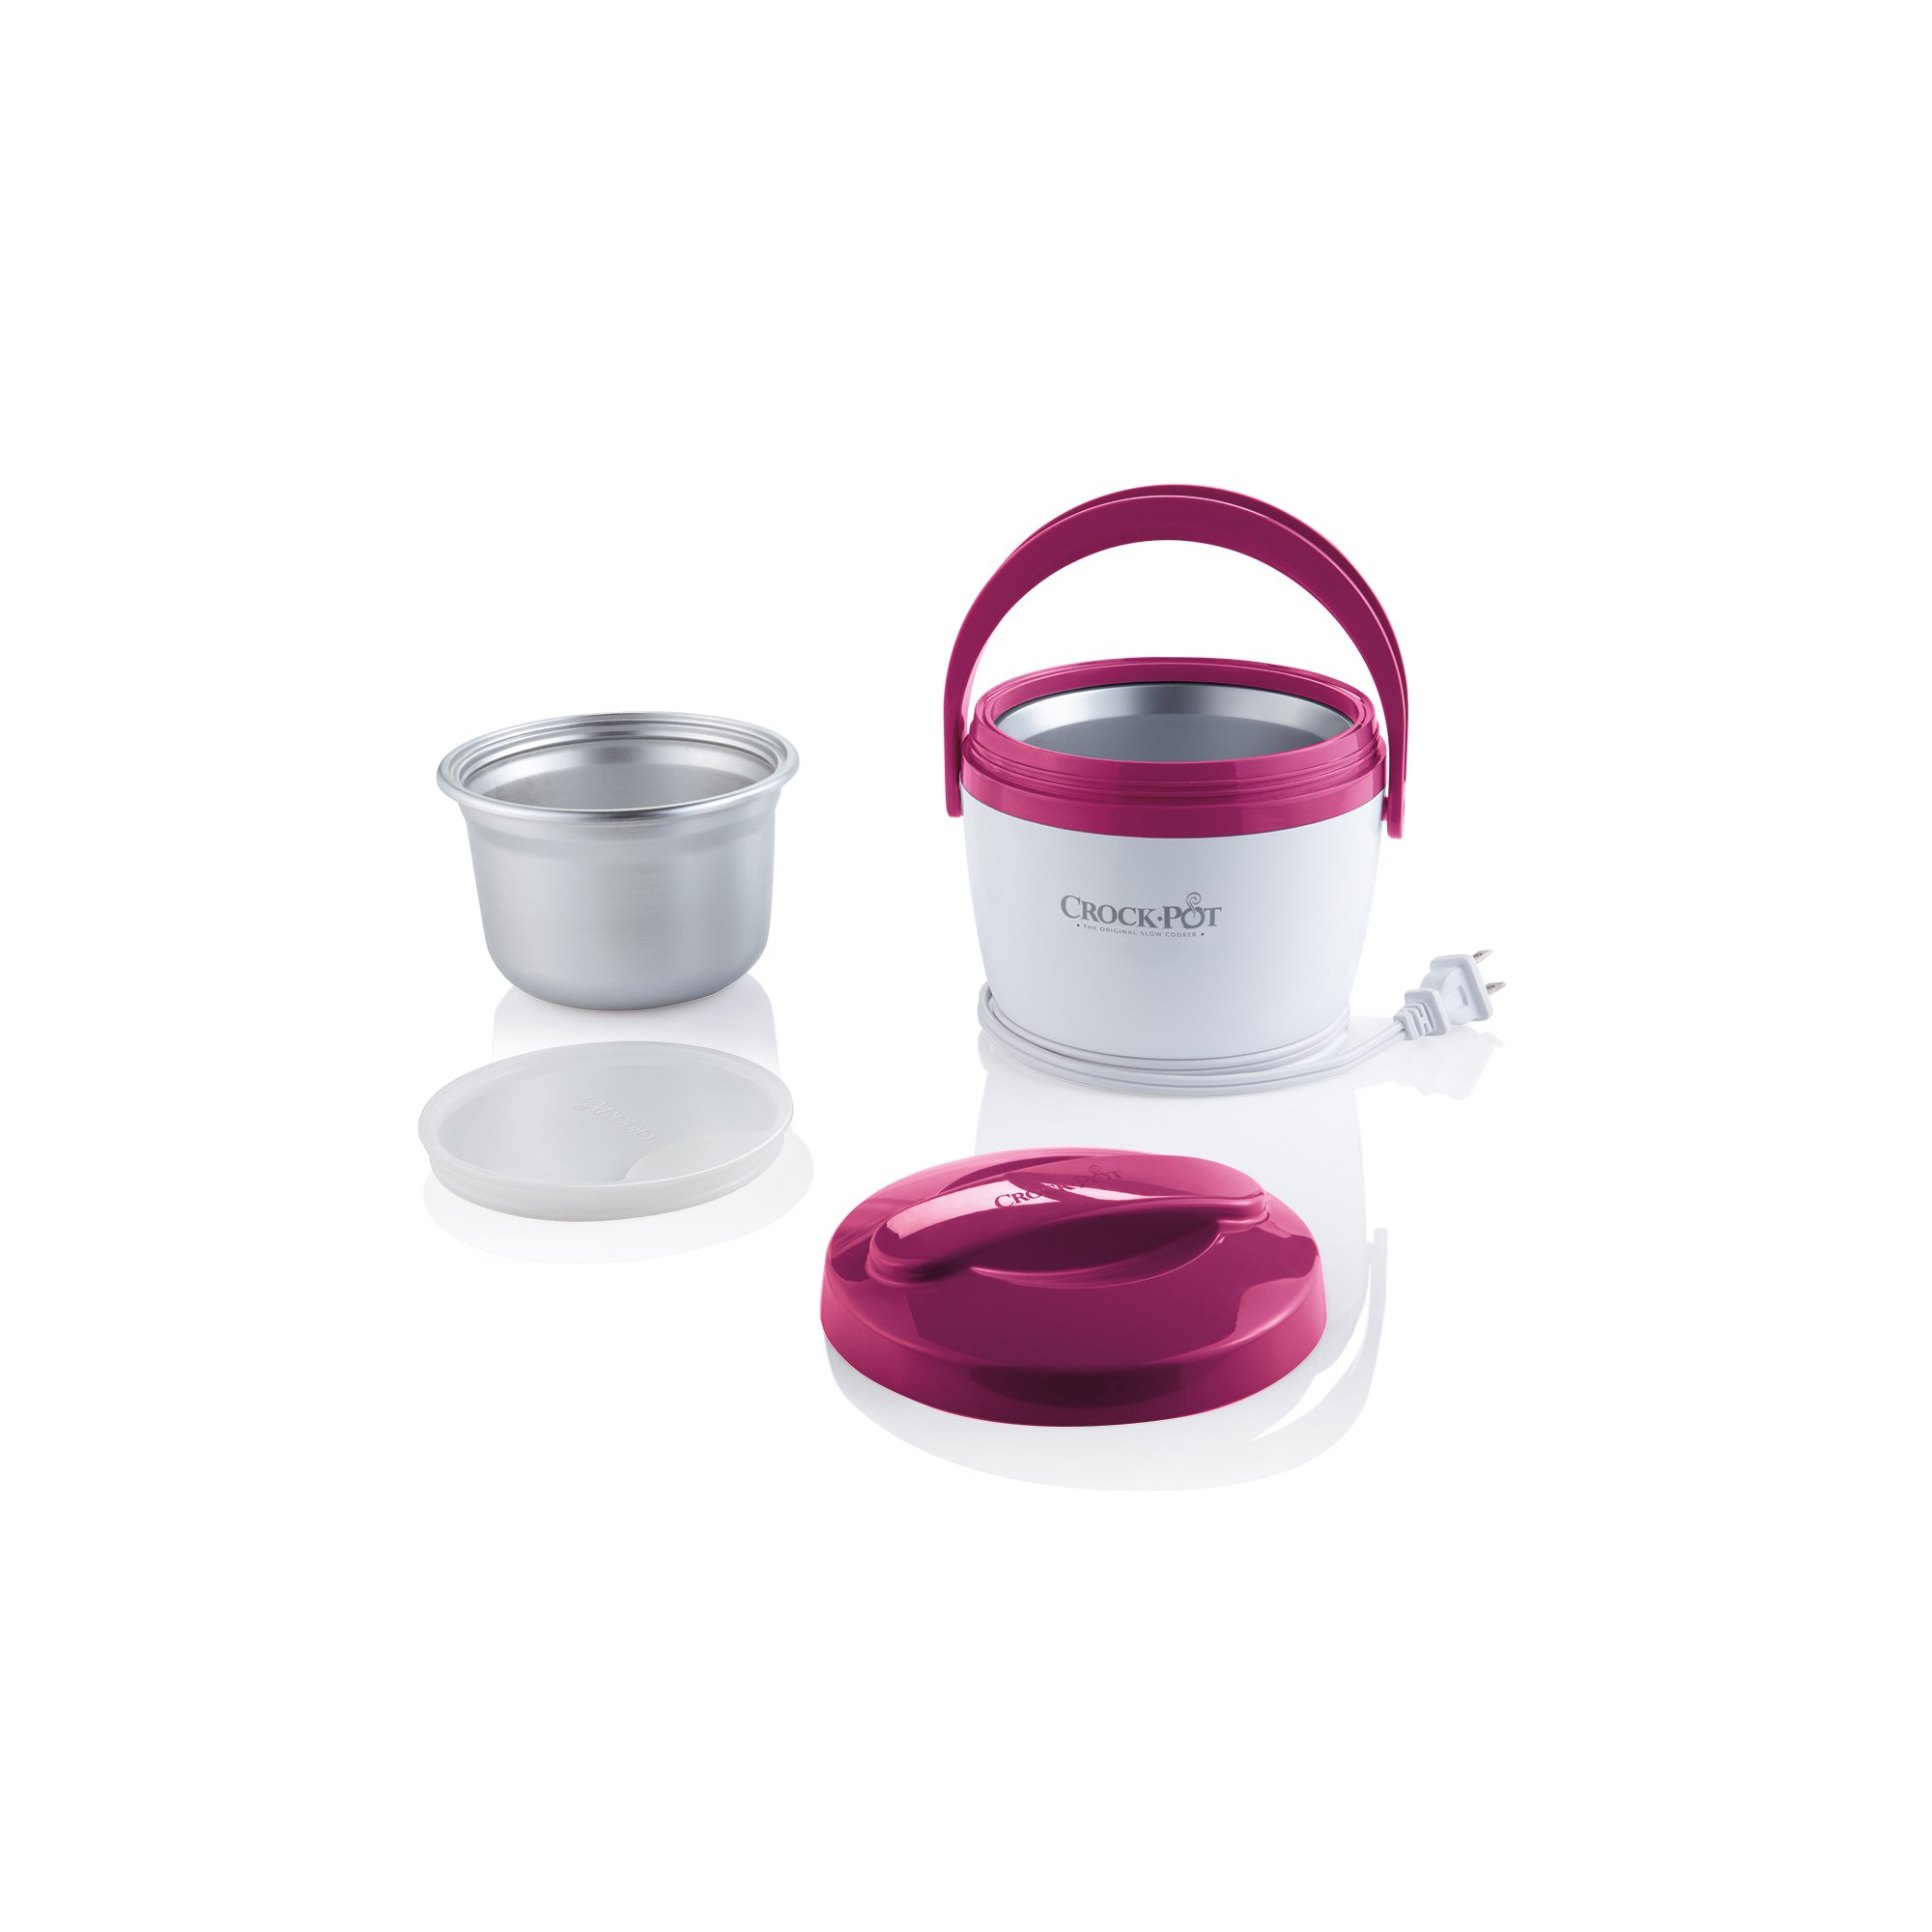 Crockpot On-The-Go Personal Food Warmer - Pink